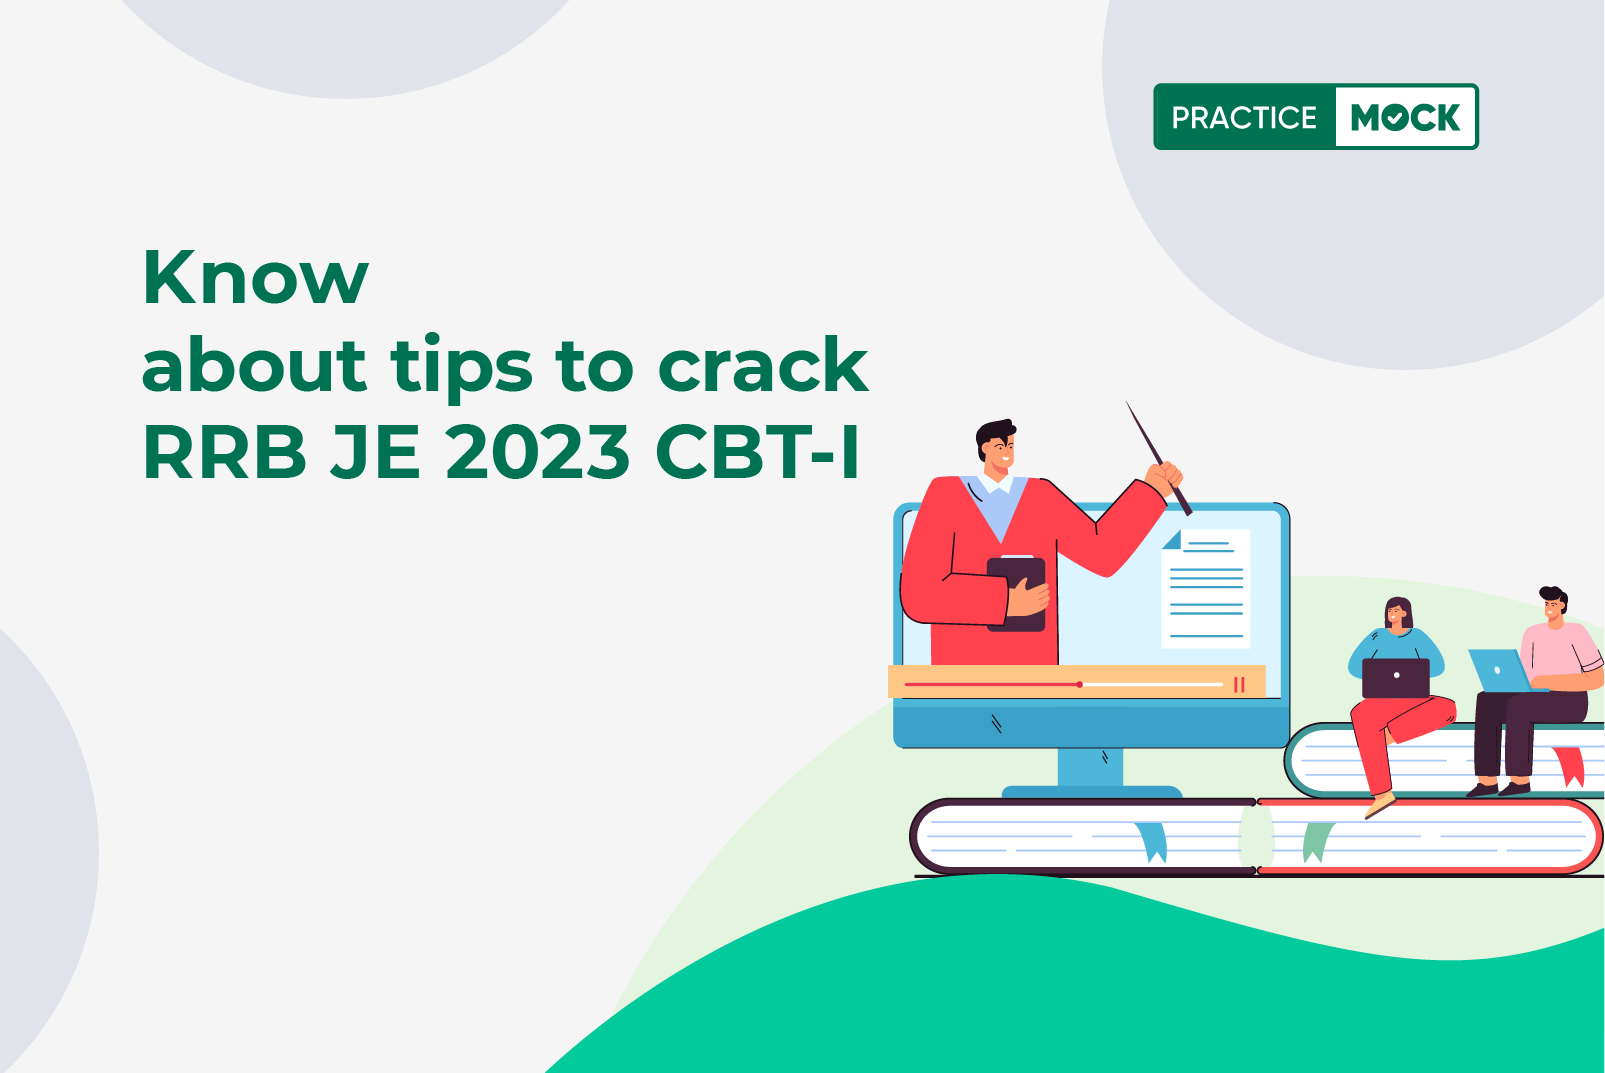 Know about tips to crack RRB JE 2023 CBT I